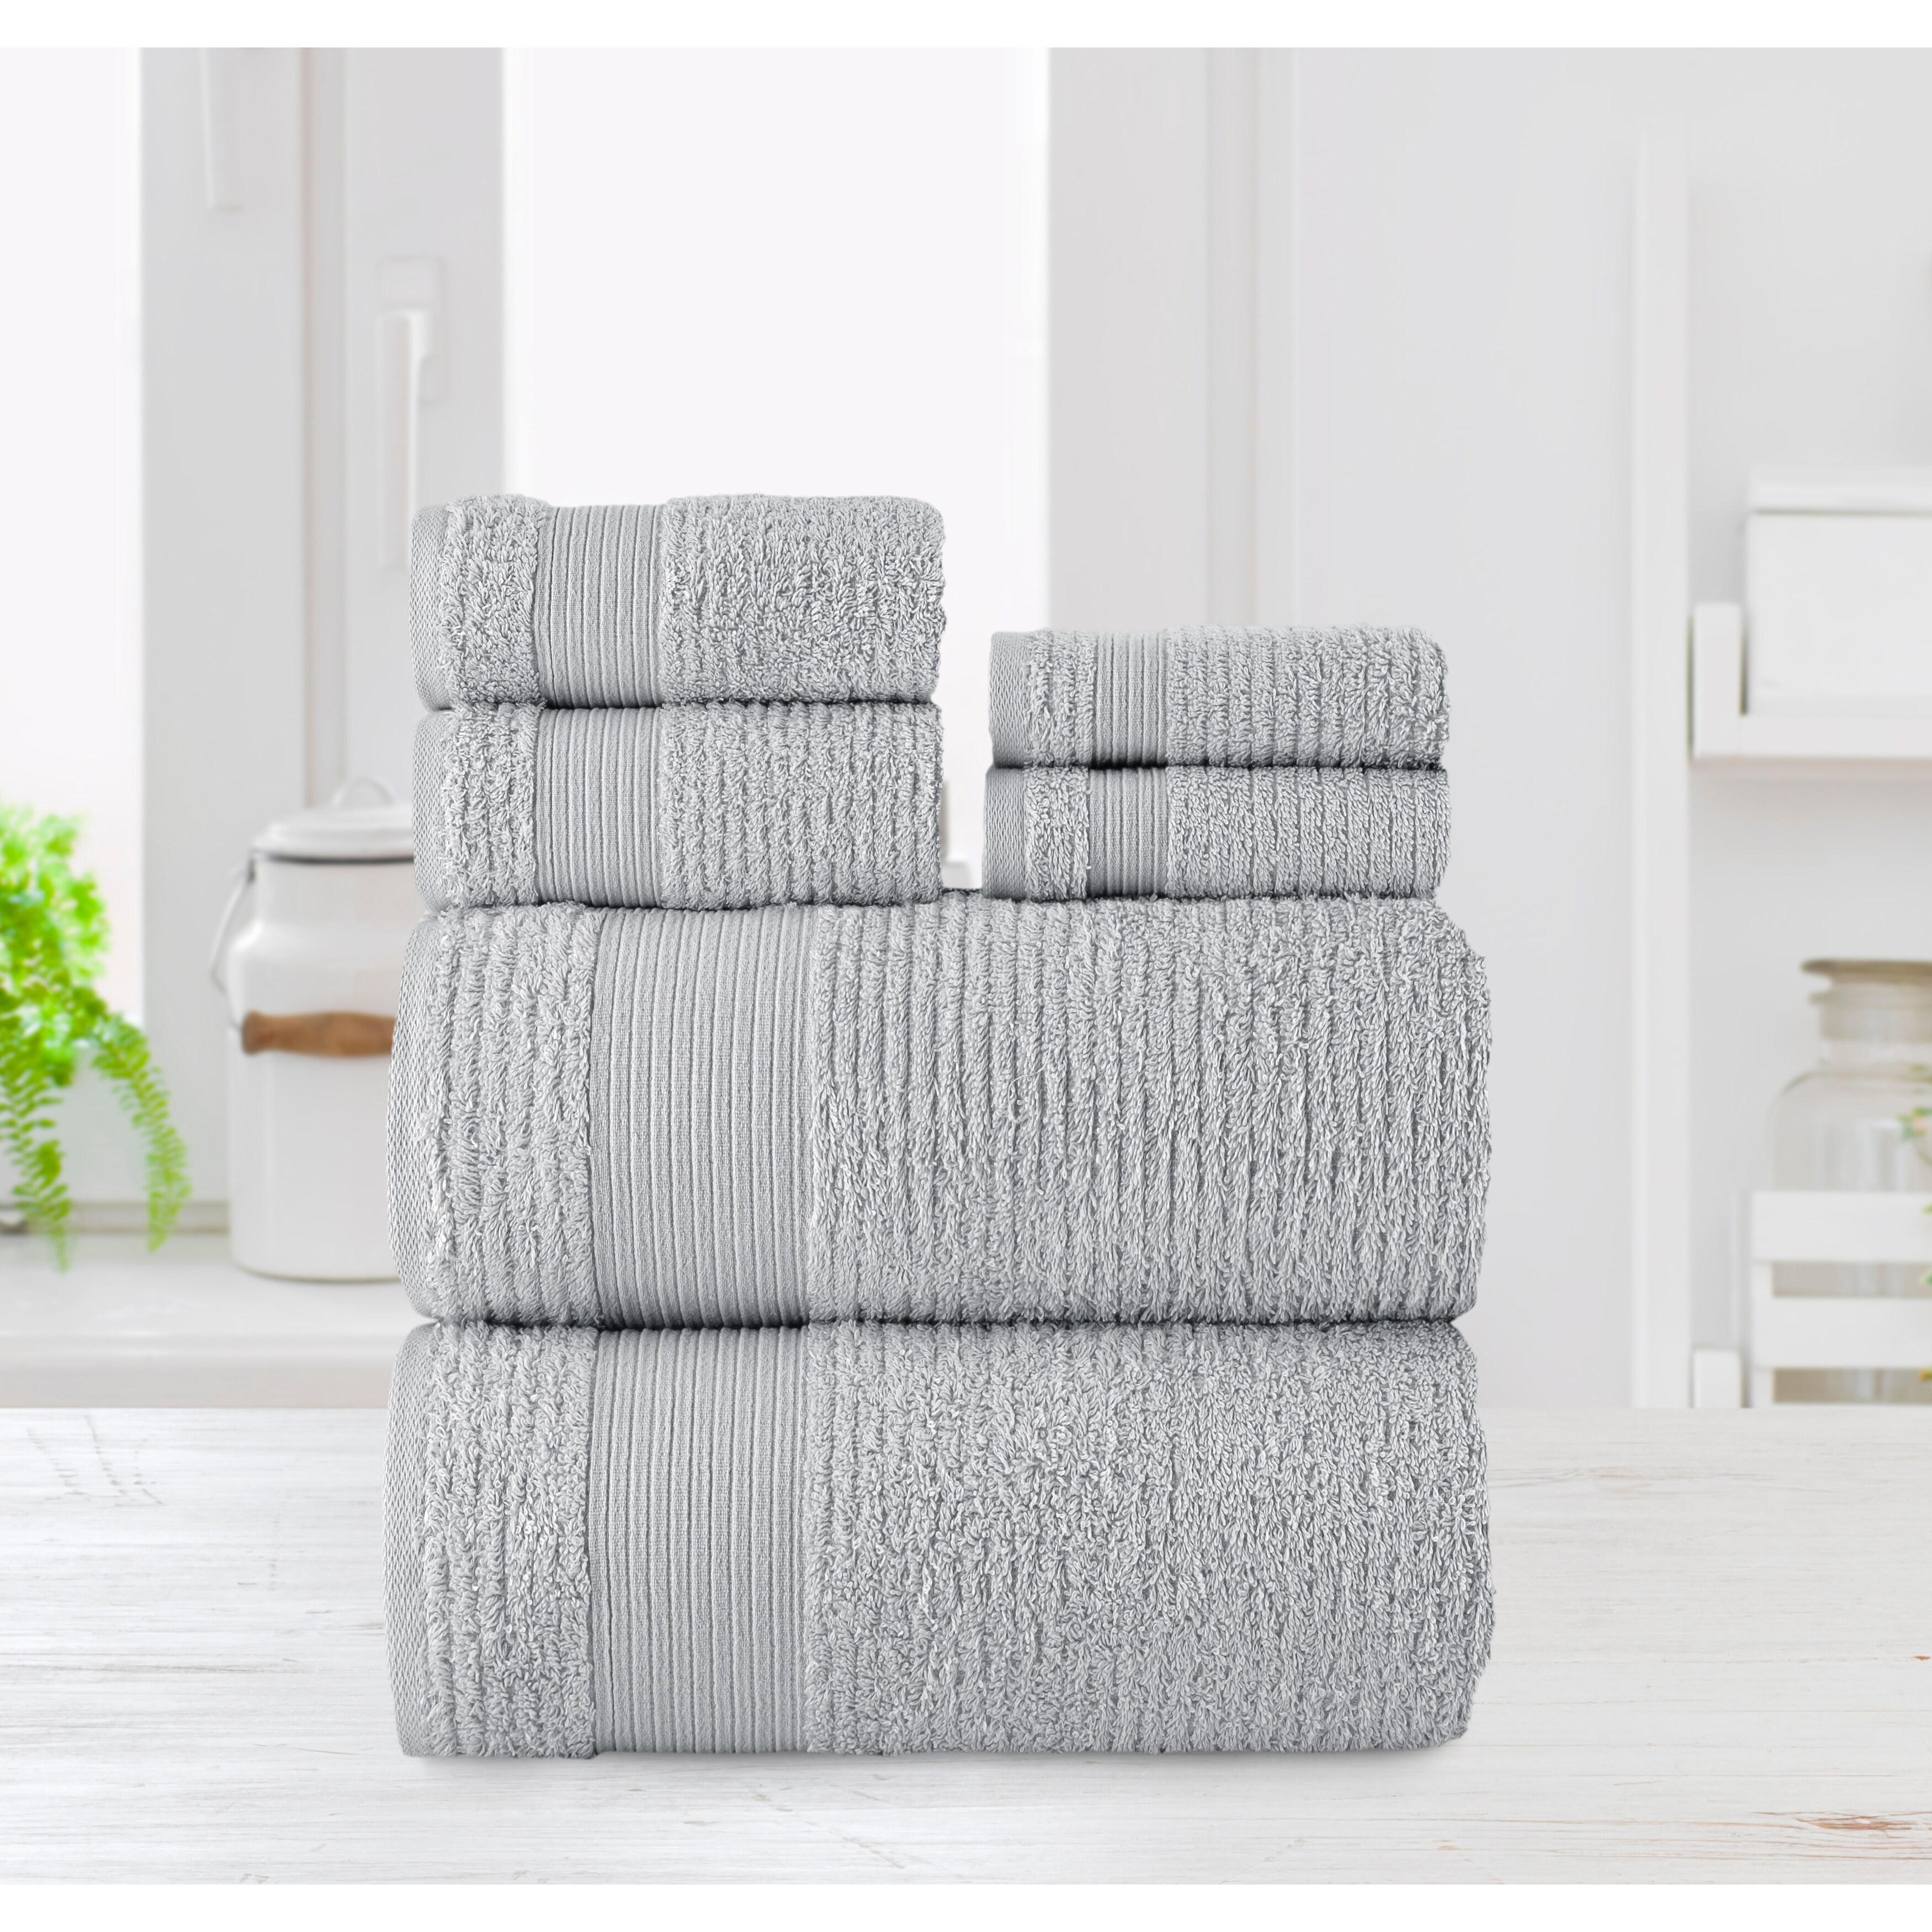 https://ak1.ostkcdn.com/images/products/is/images/direct/44220b3460eca5d93bf7469c5fe5383e33599dc8/Chic-Home-6-Piece-Standard-100-Oeko-Tex-Certified-Towel-Set.jpg